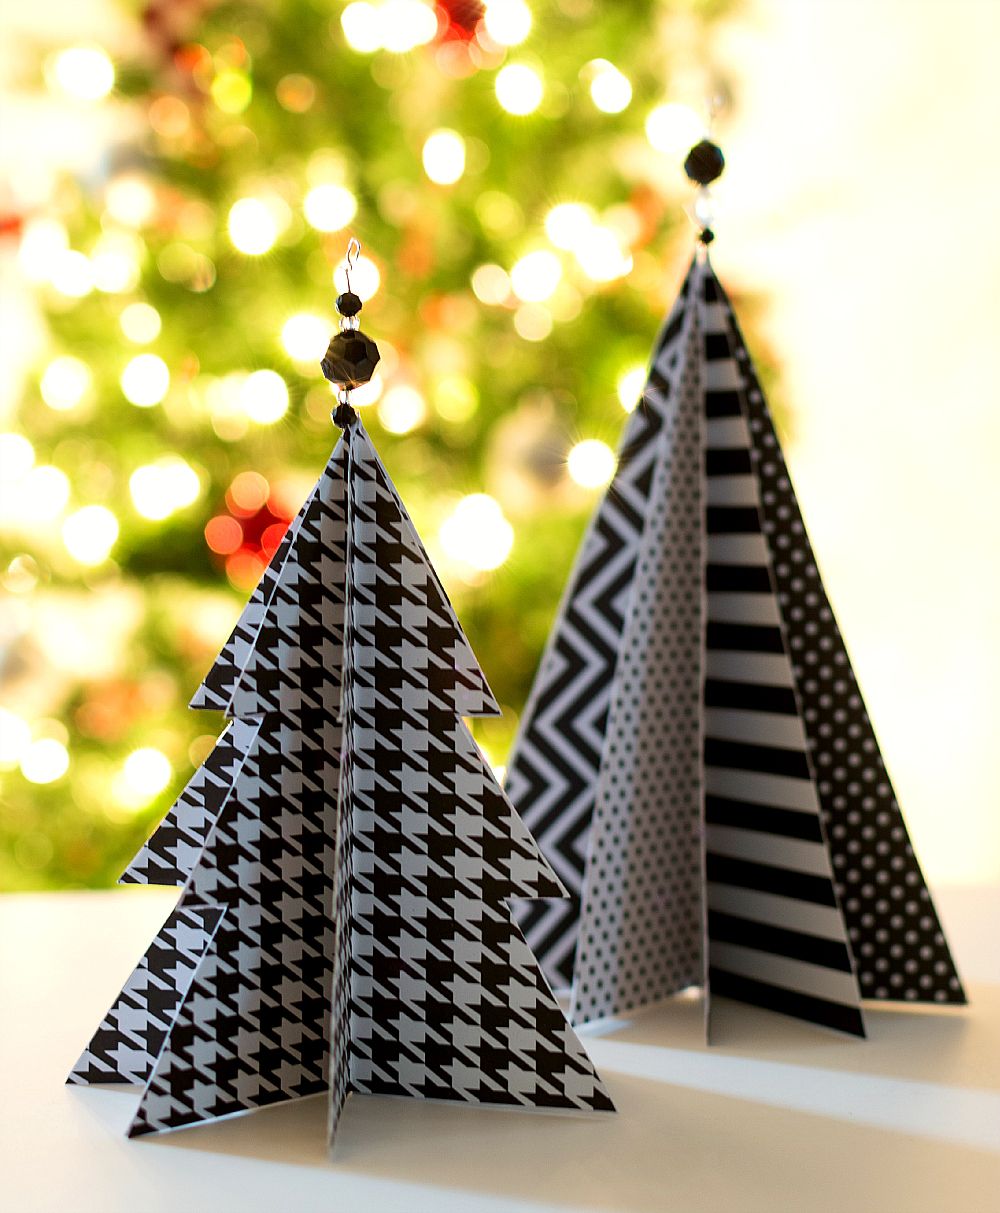 AMAZING Upcycling Ideas for Christmas Home Decor